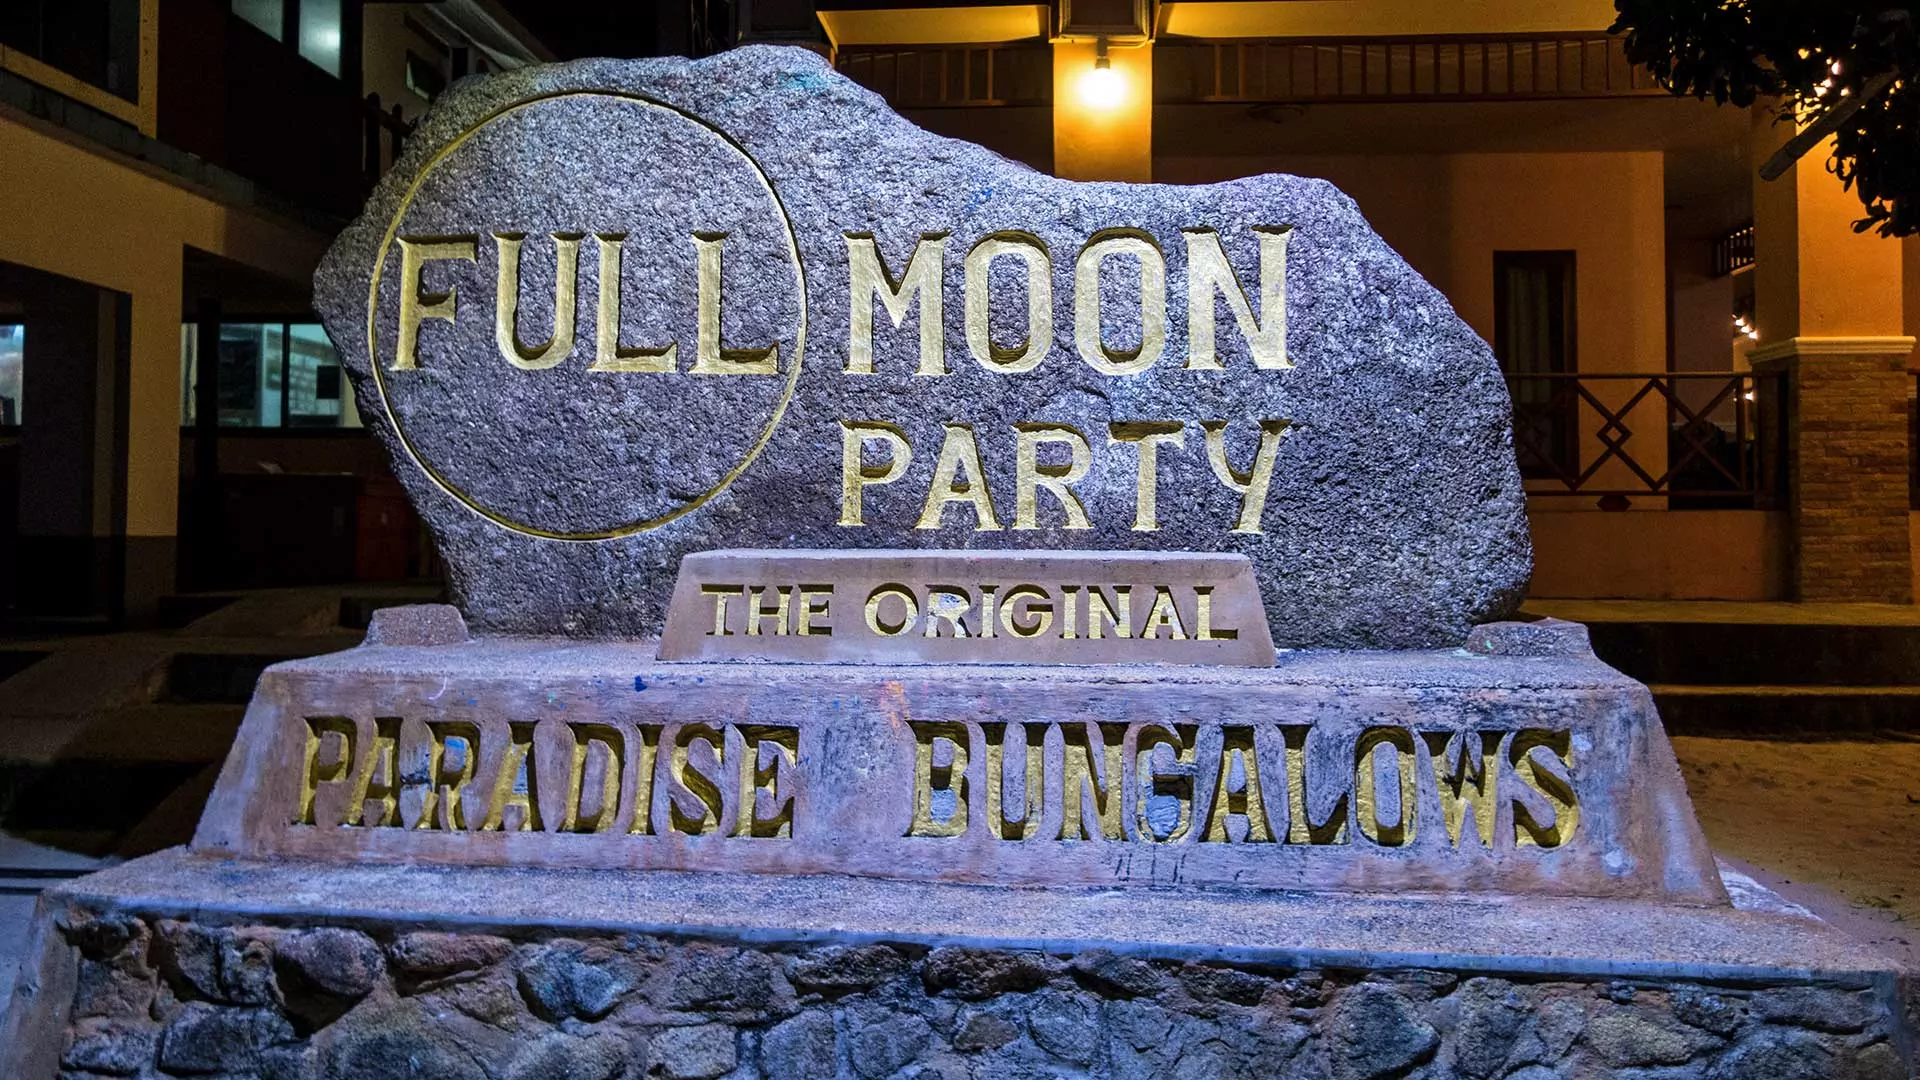 Where to stay during the whole moon party? 